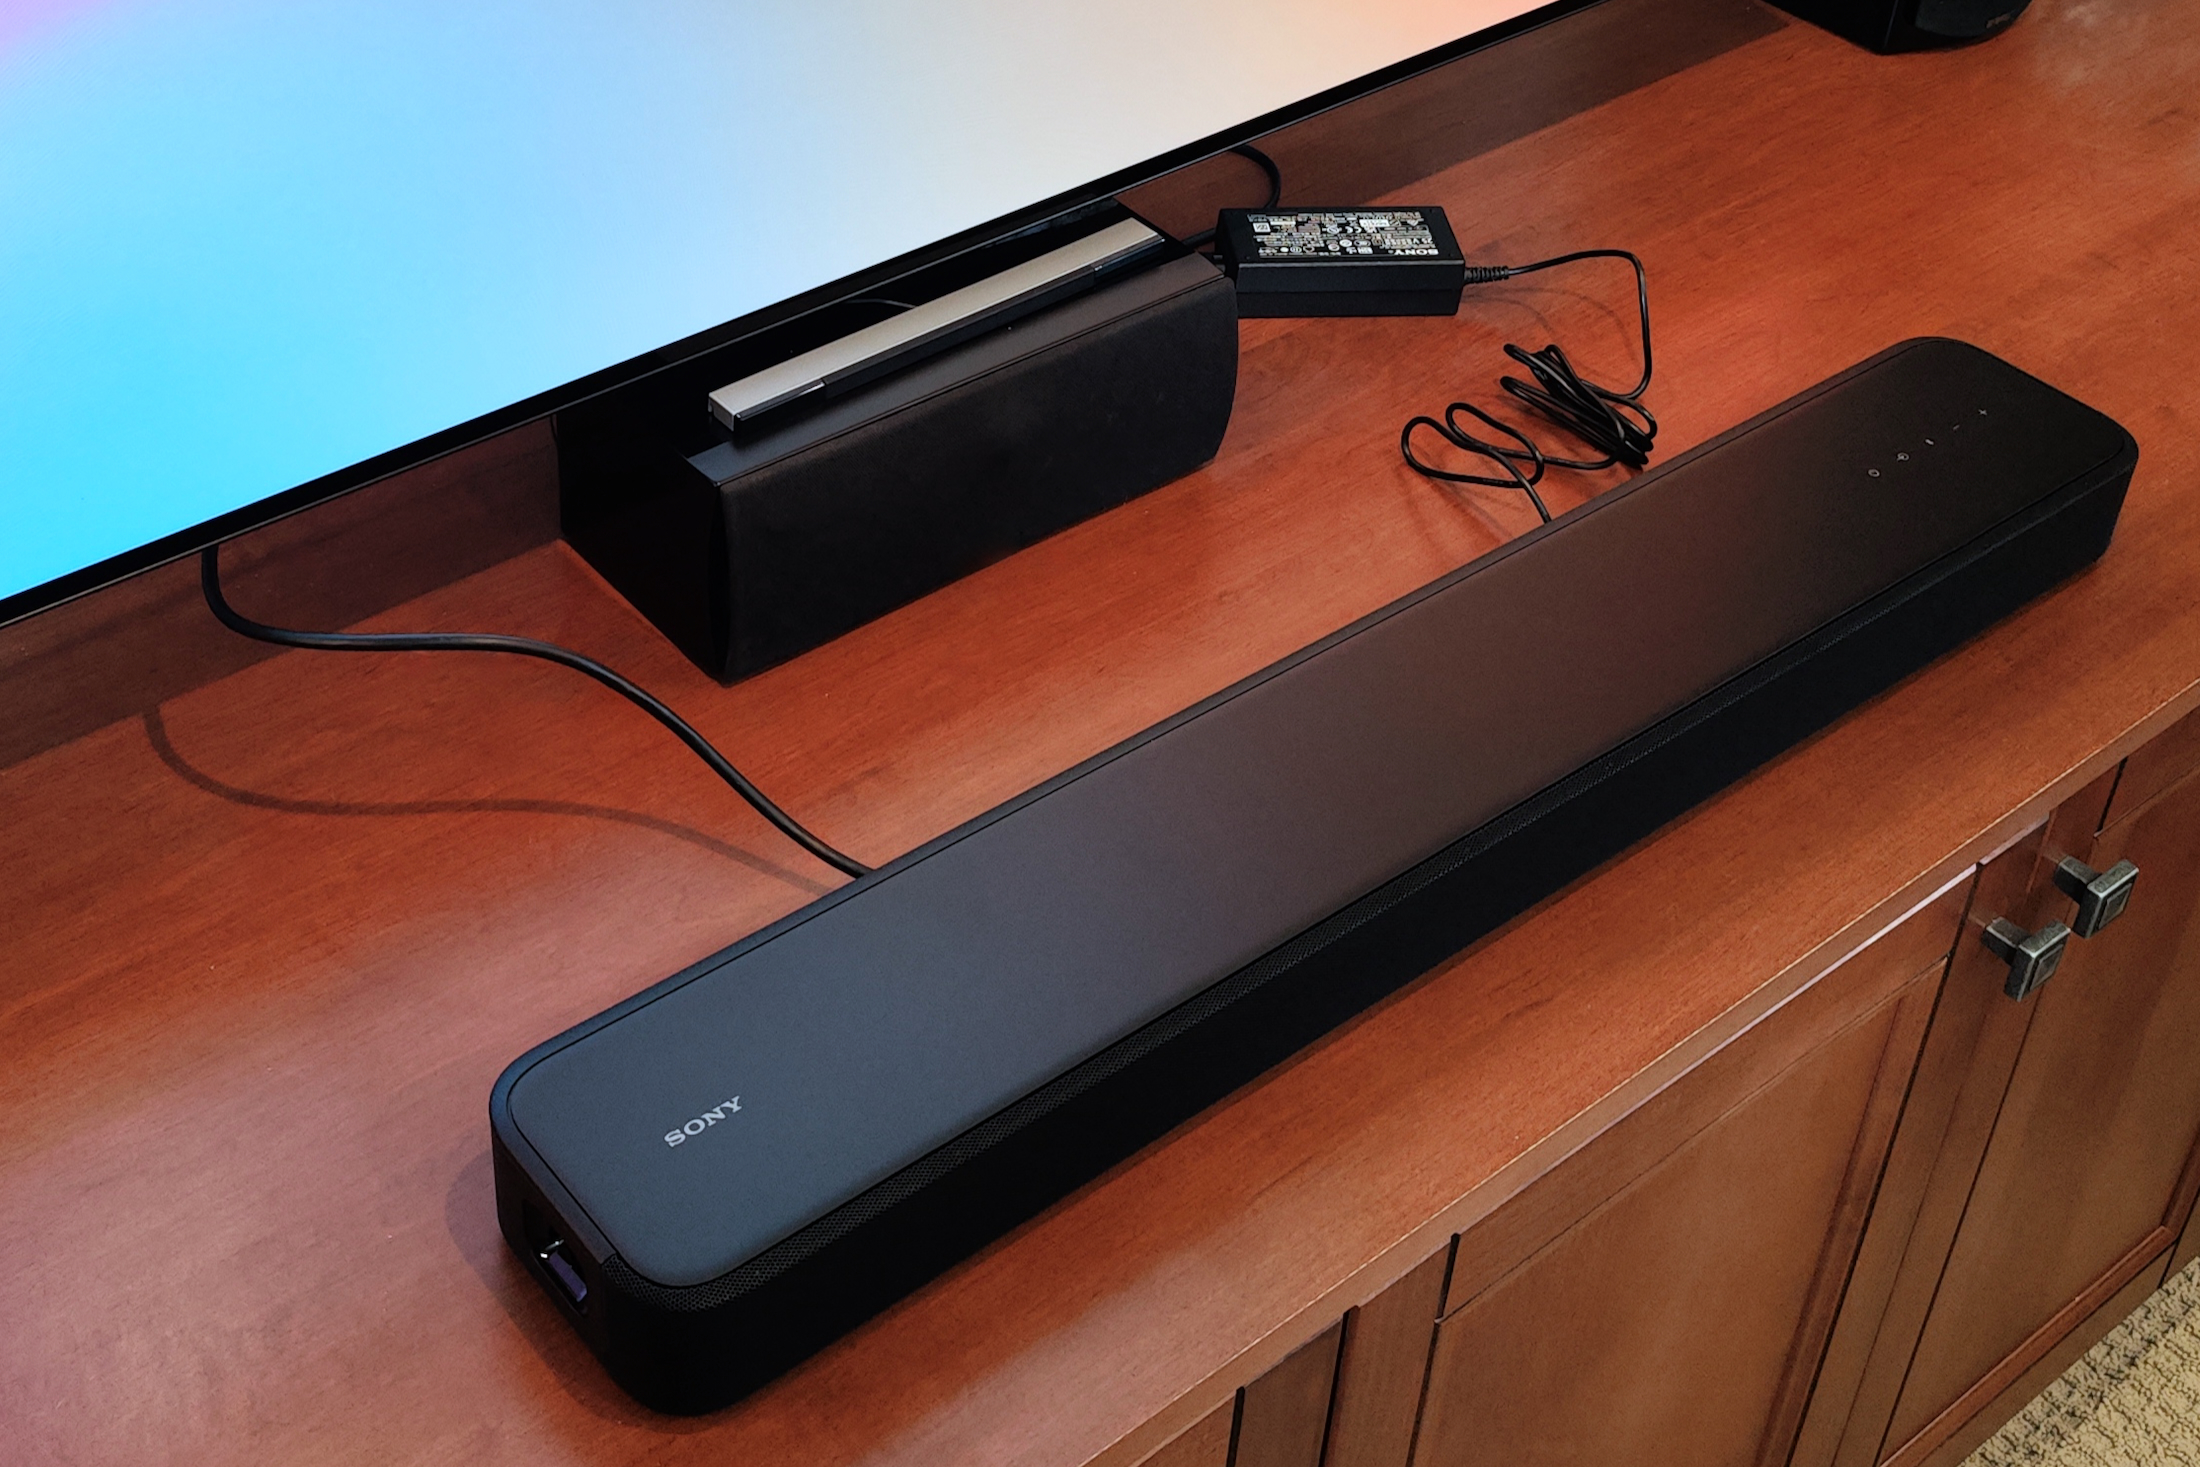 Senatet angre Parcel Sony HT-S2000 review: Sony trades smarts for bigger sound | Digital Trends